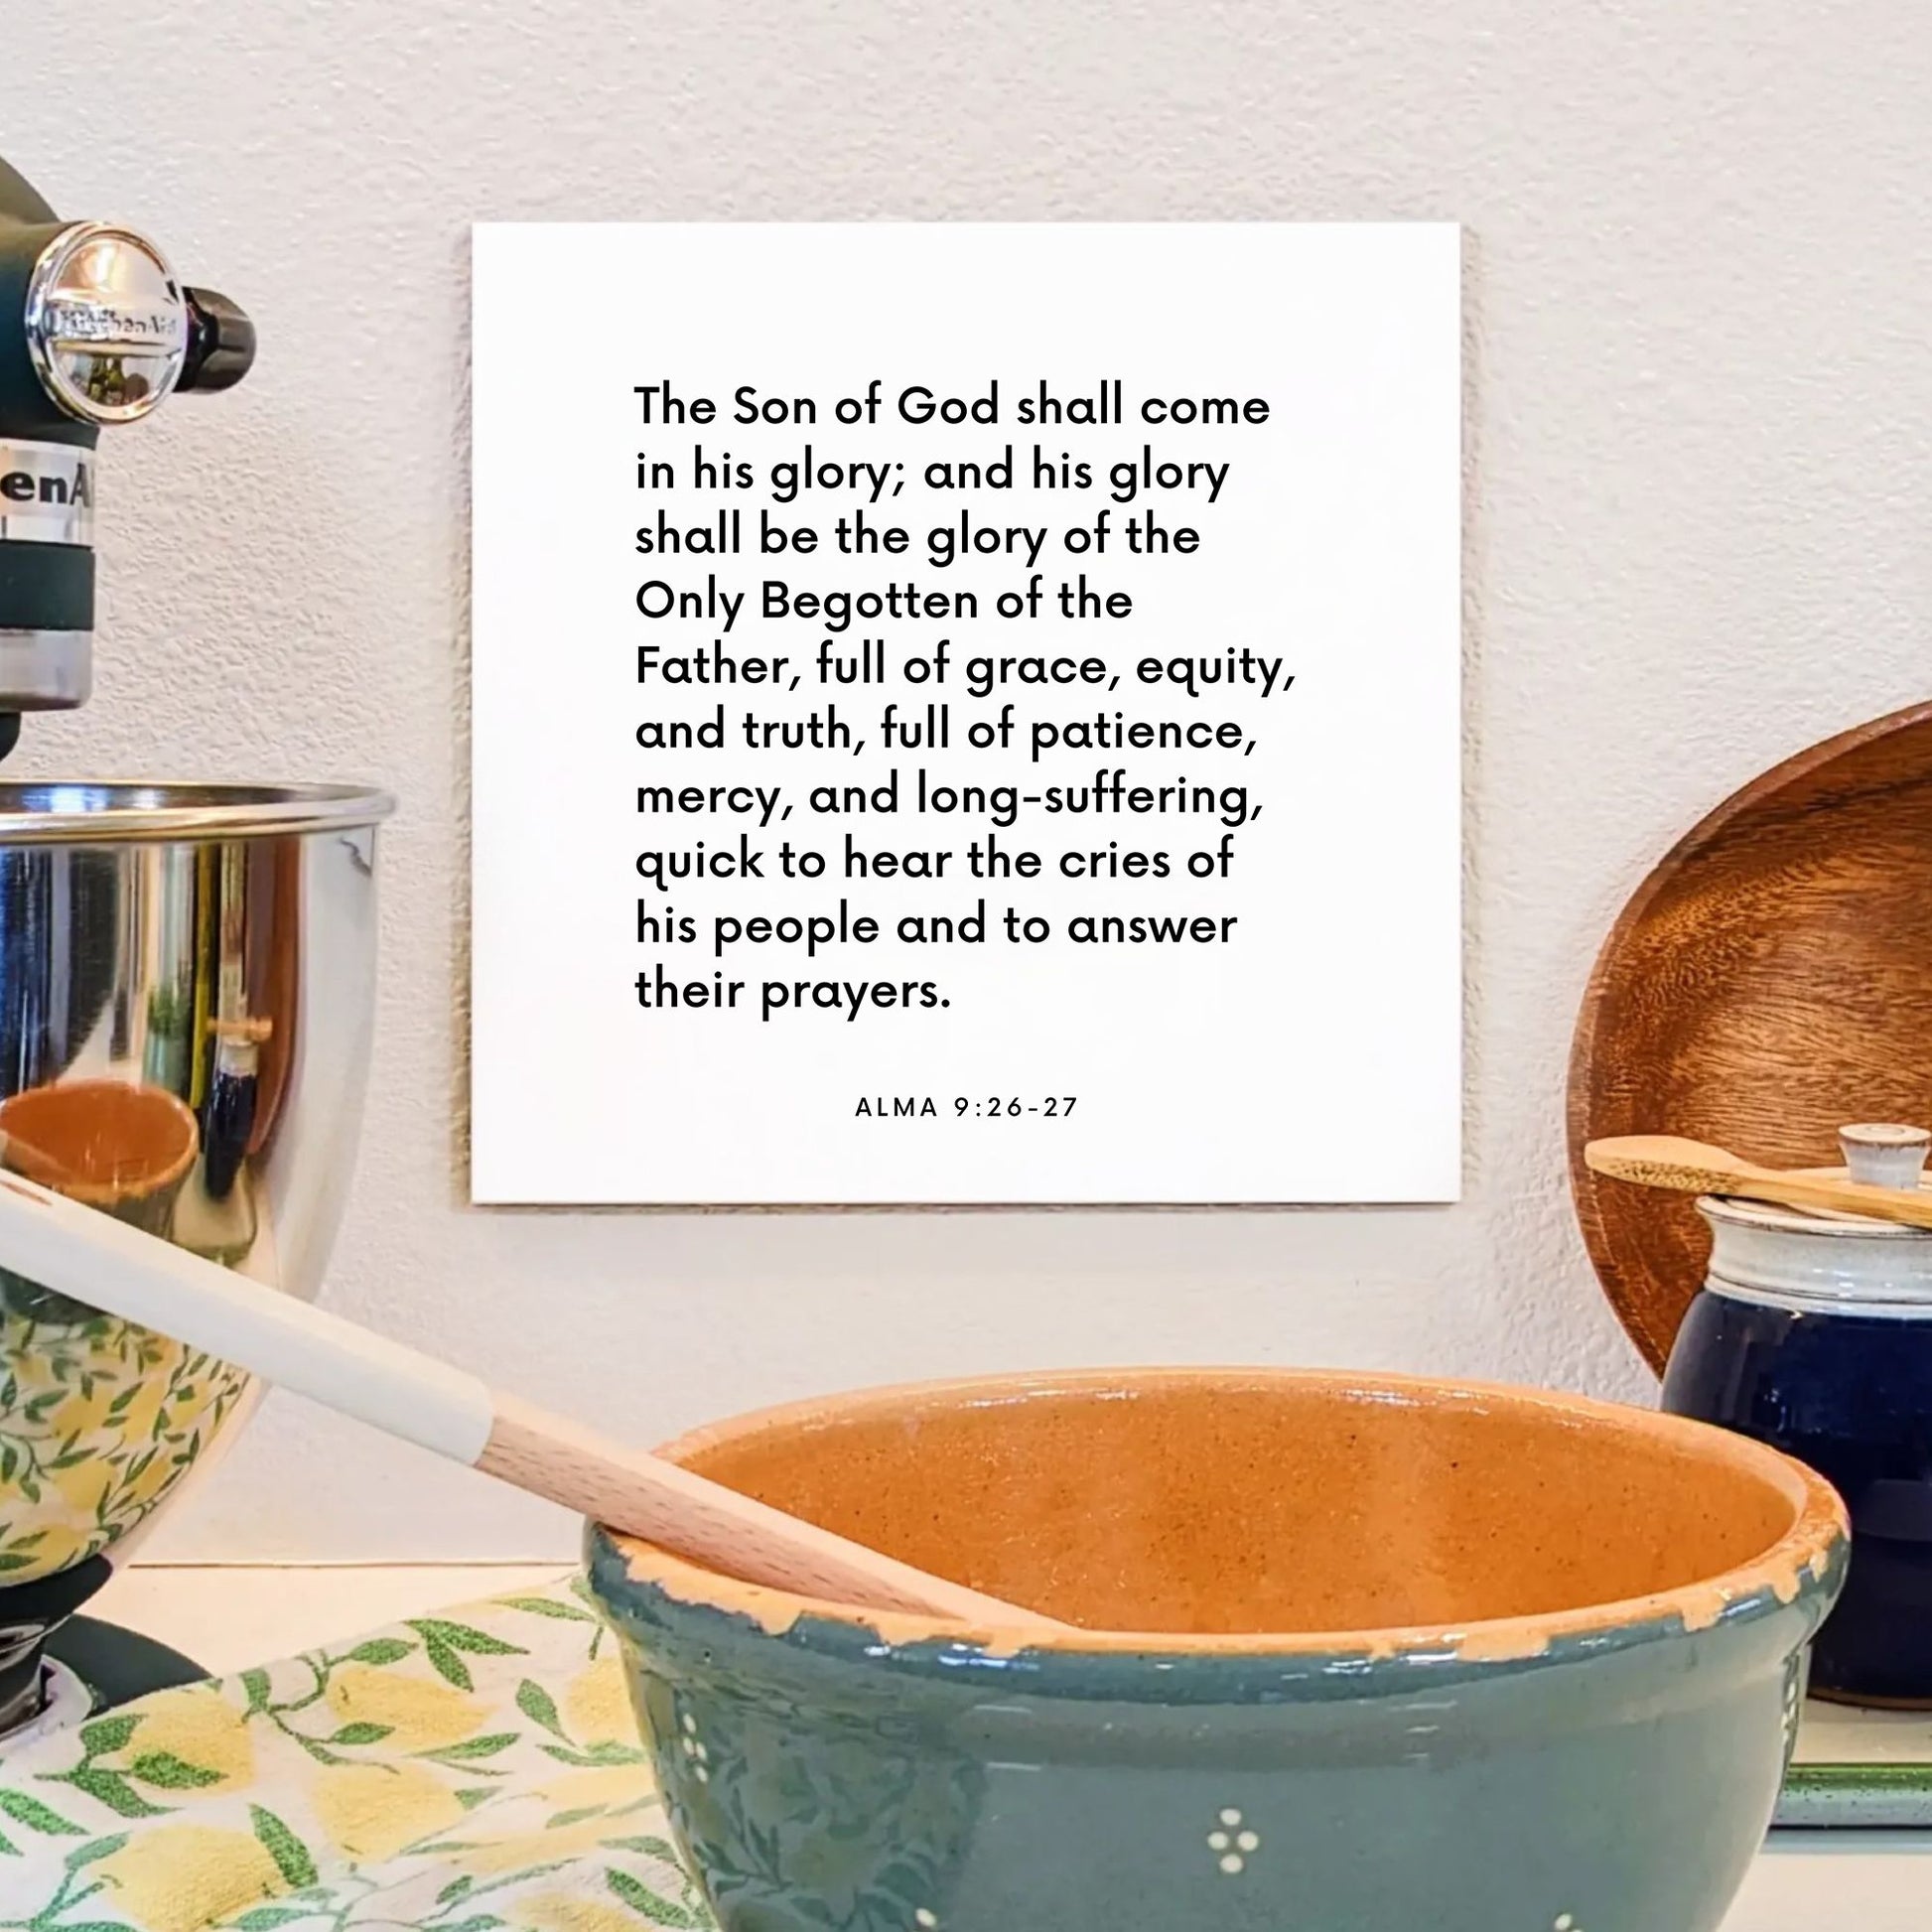 Kitchen mouting of the scripture tile for Alma 9:26-27 - "The Son of God shall come in his glory"